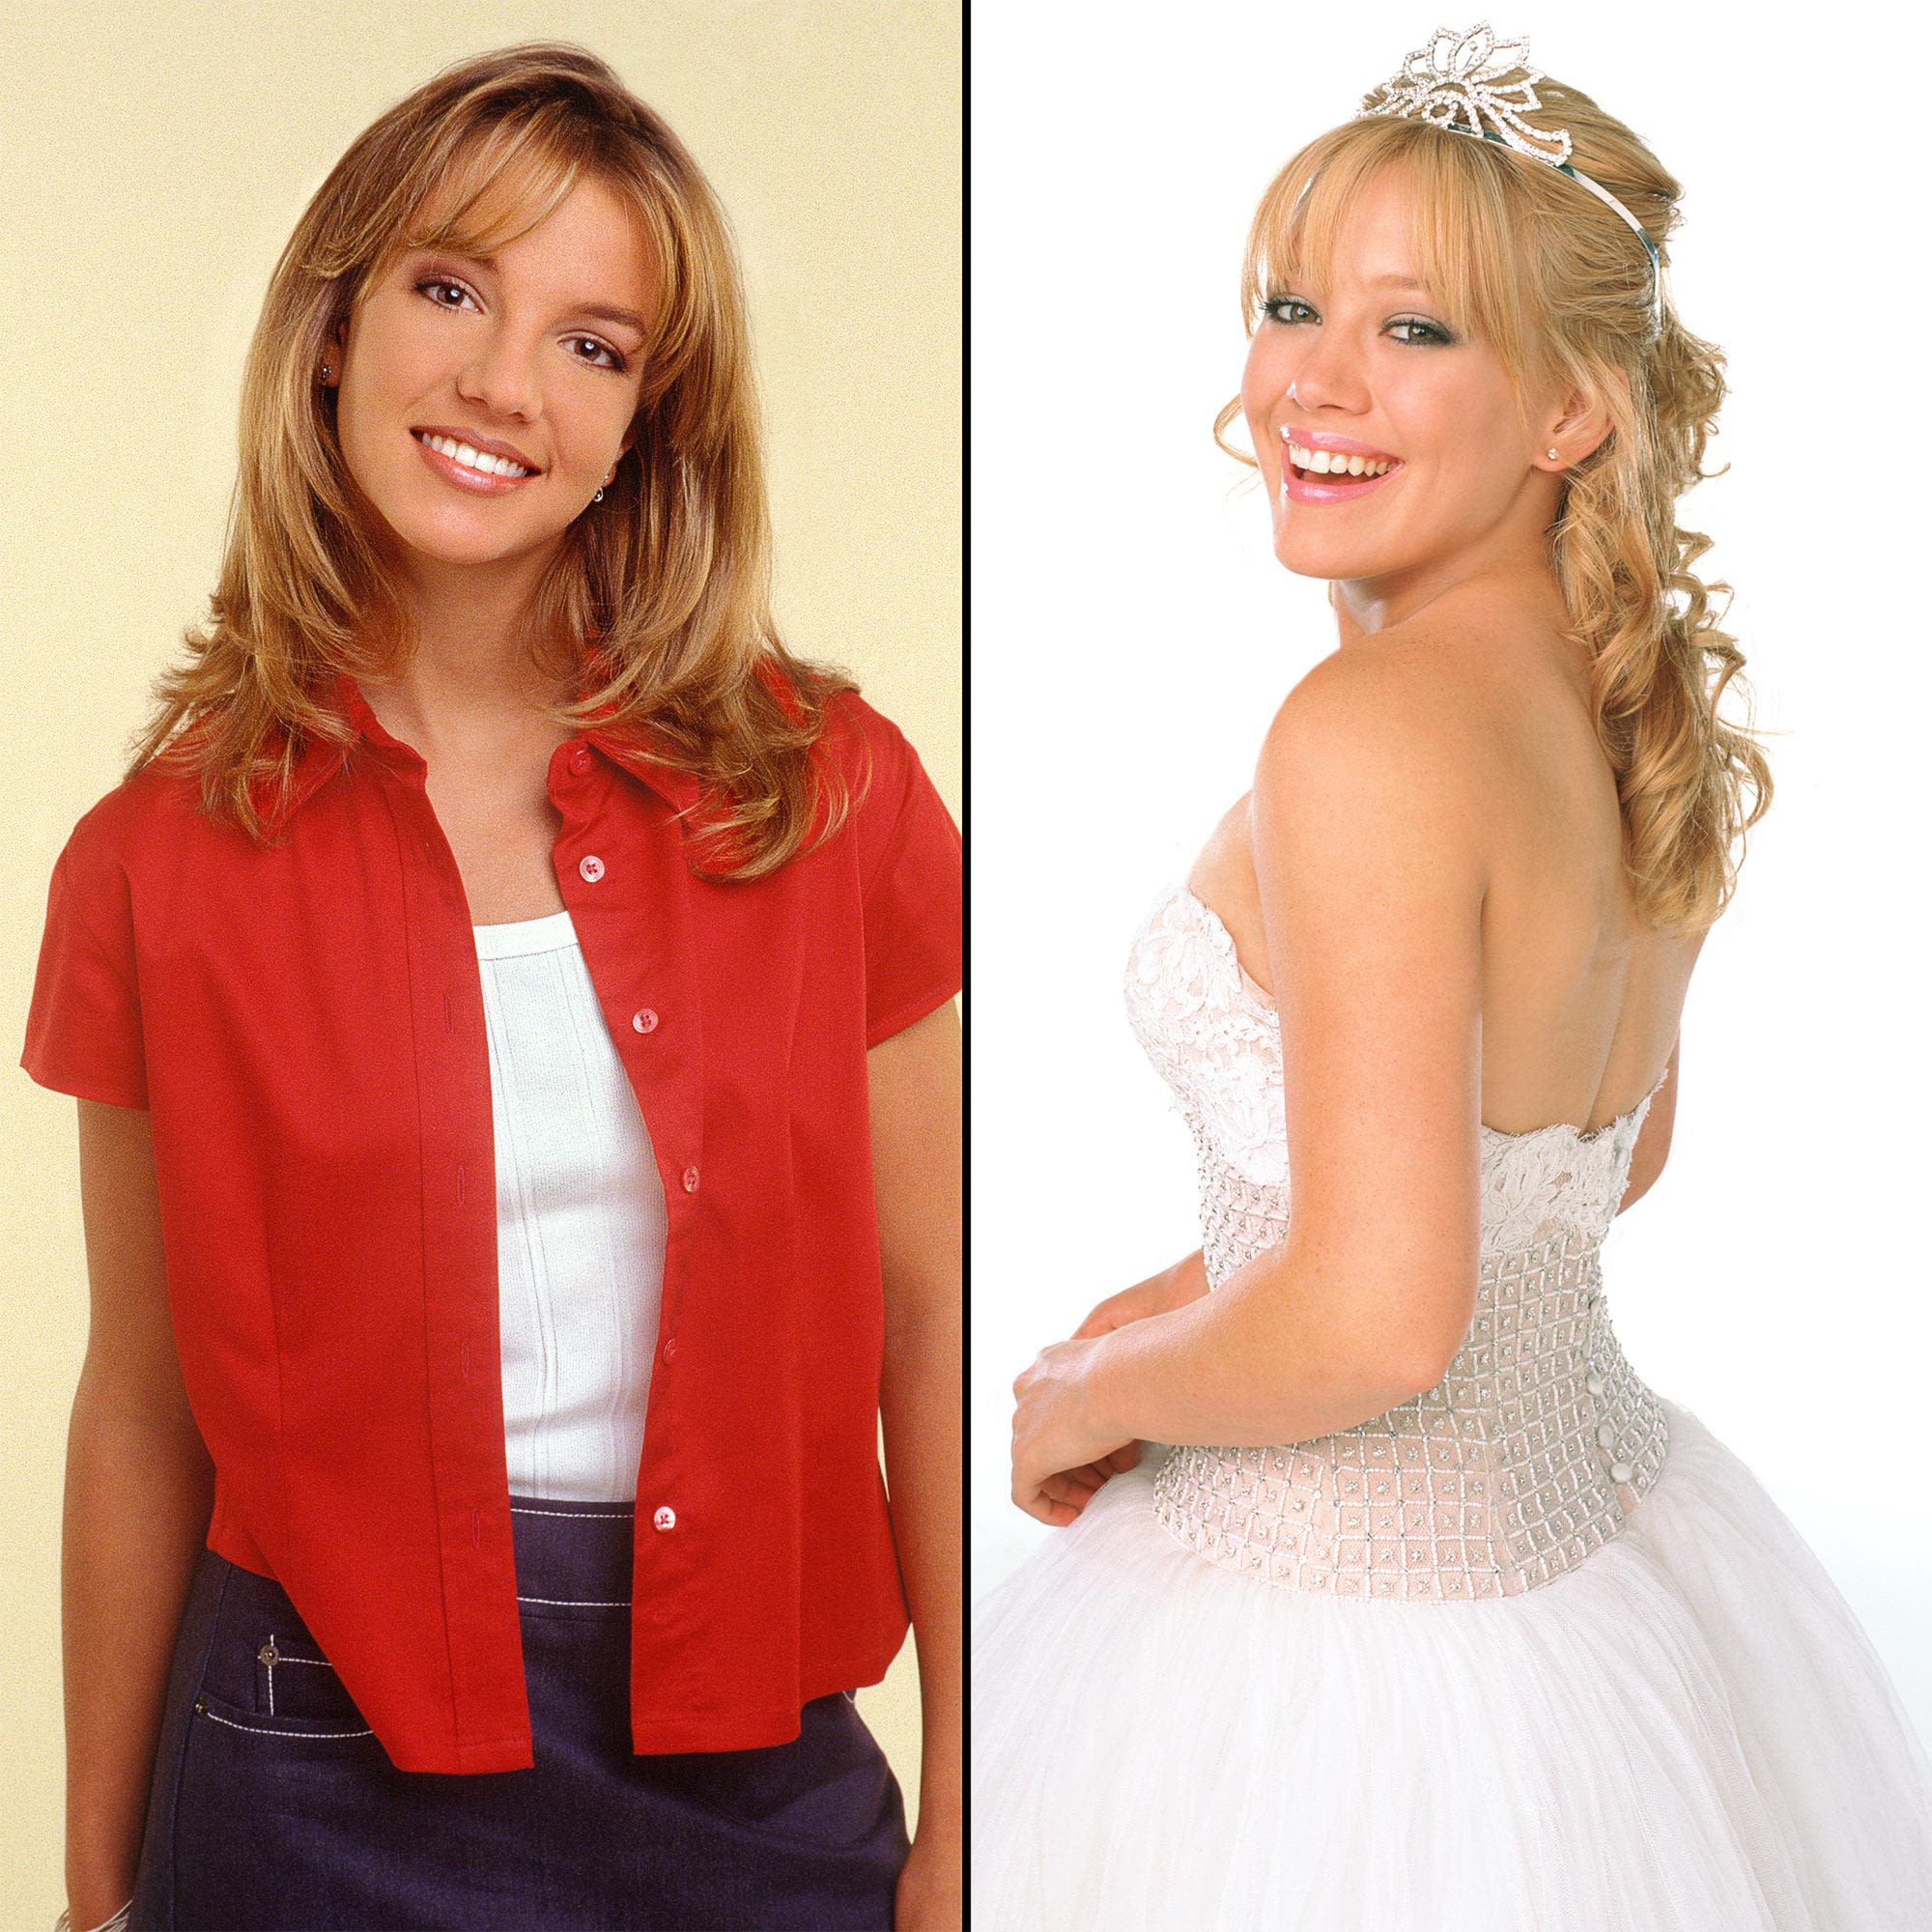 Britney Spears Was the Inspiration for Hilary Duff’s ‘A Cinderella Story’ Character, Screenwriter Reveals